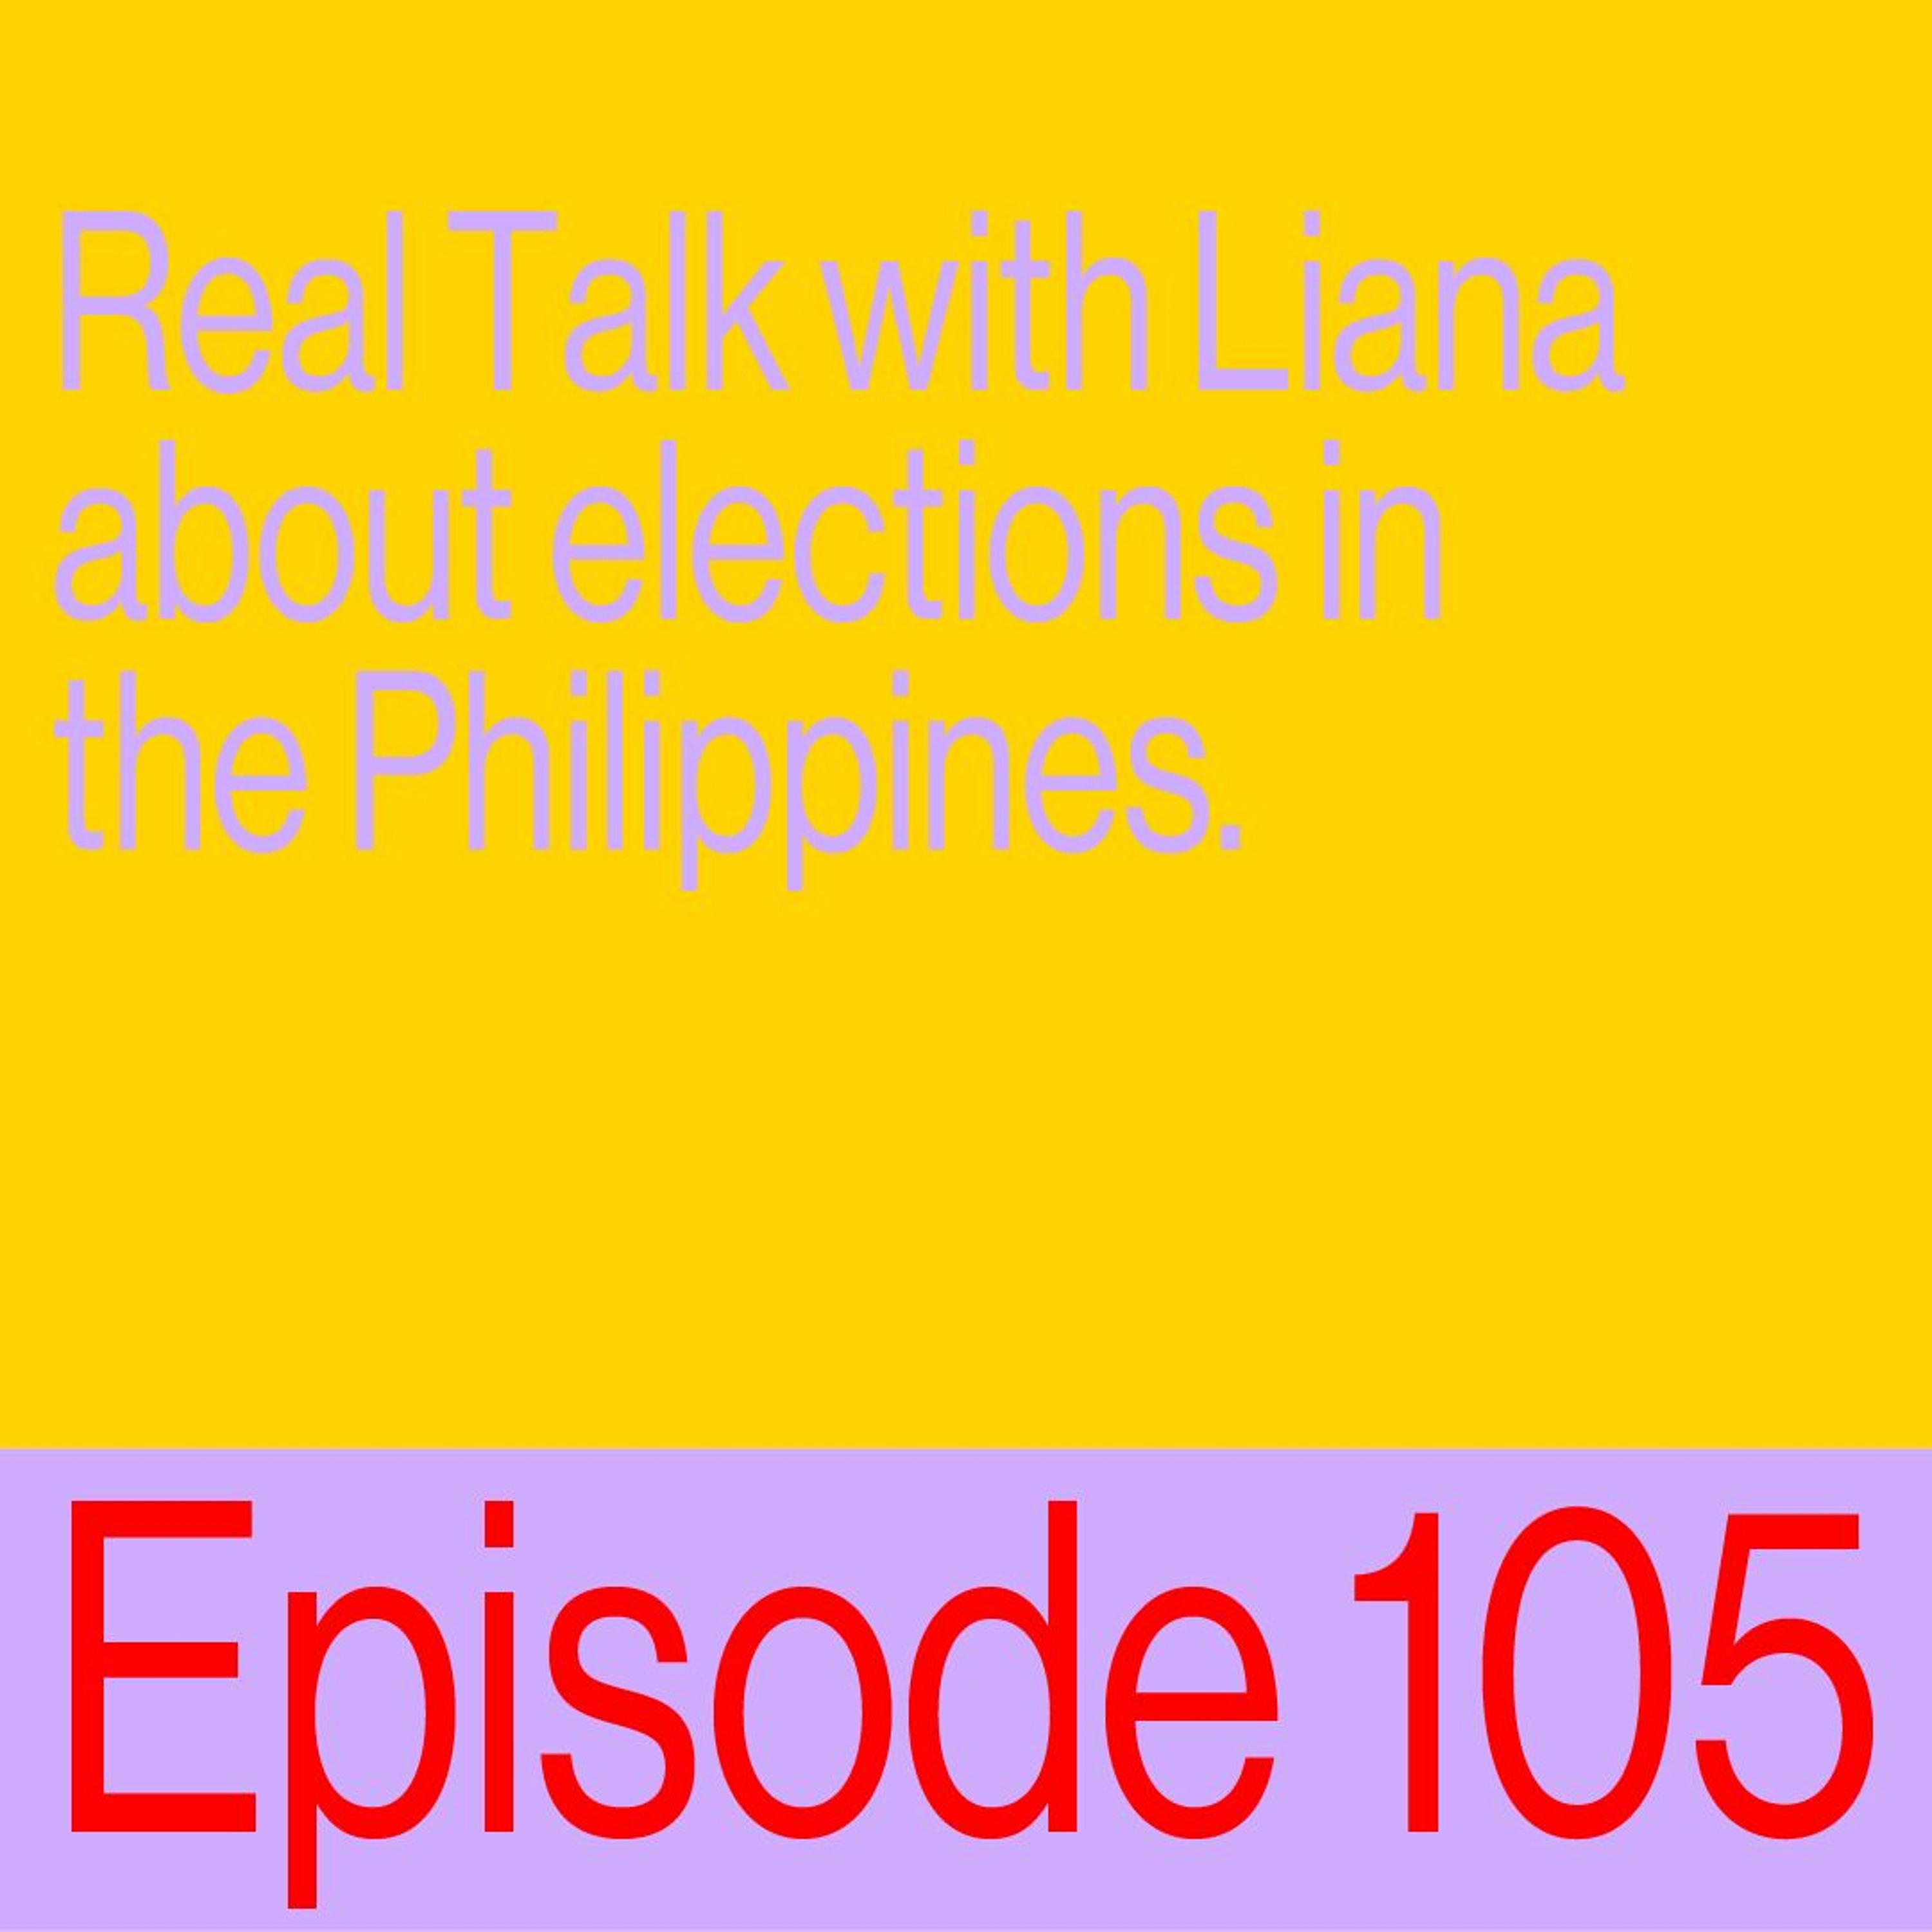 Episode 105: Real Talk with Liana about elections in the Philippines